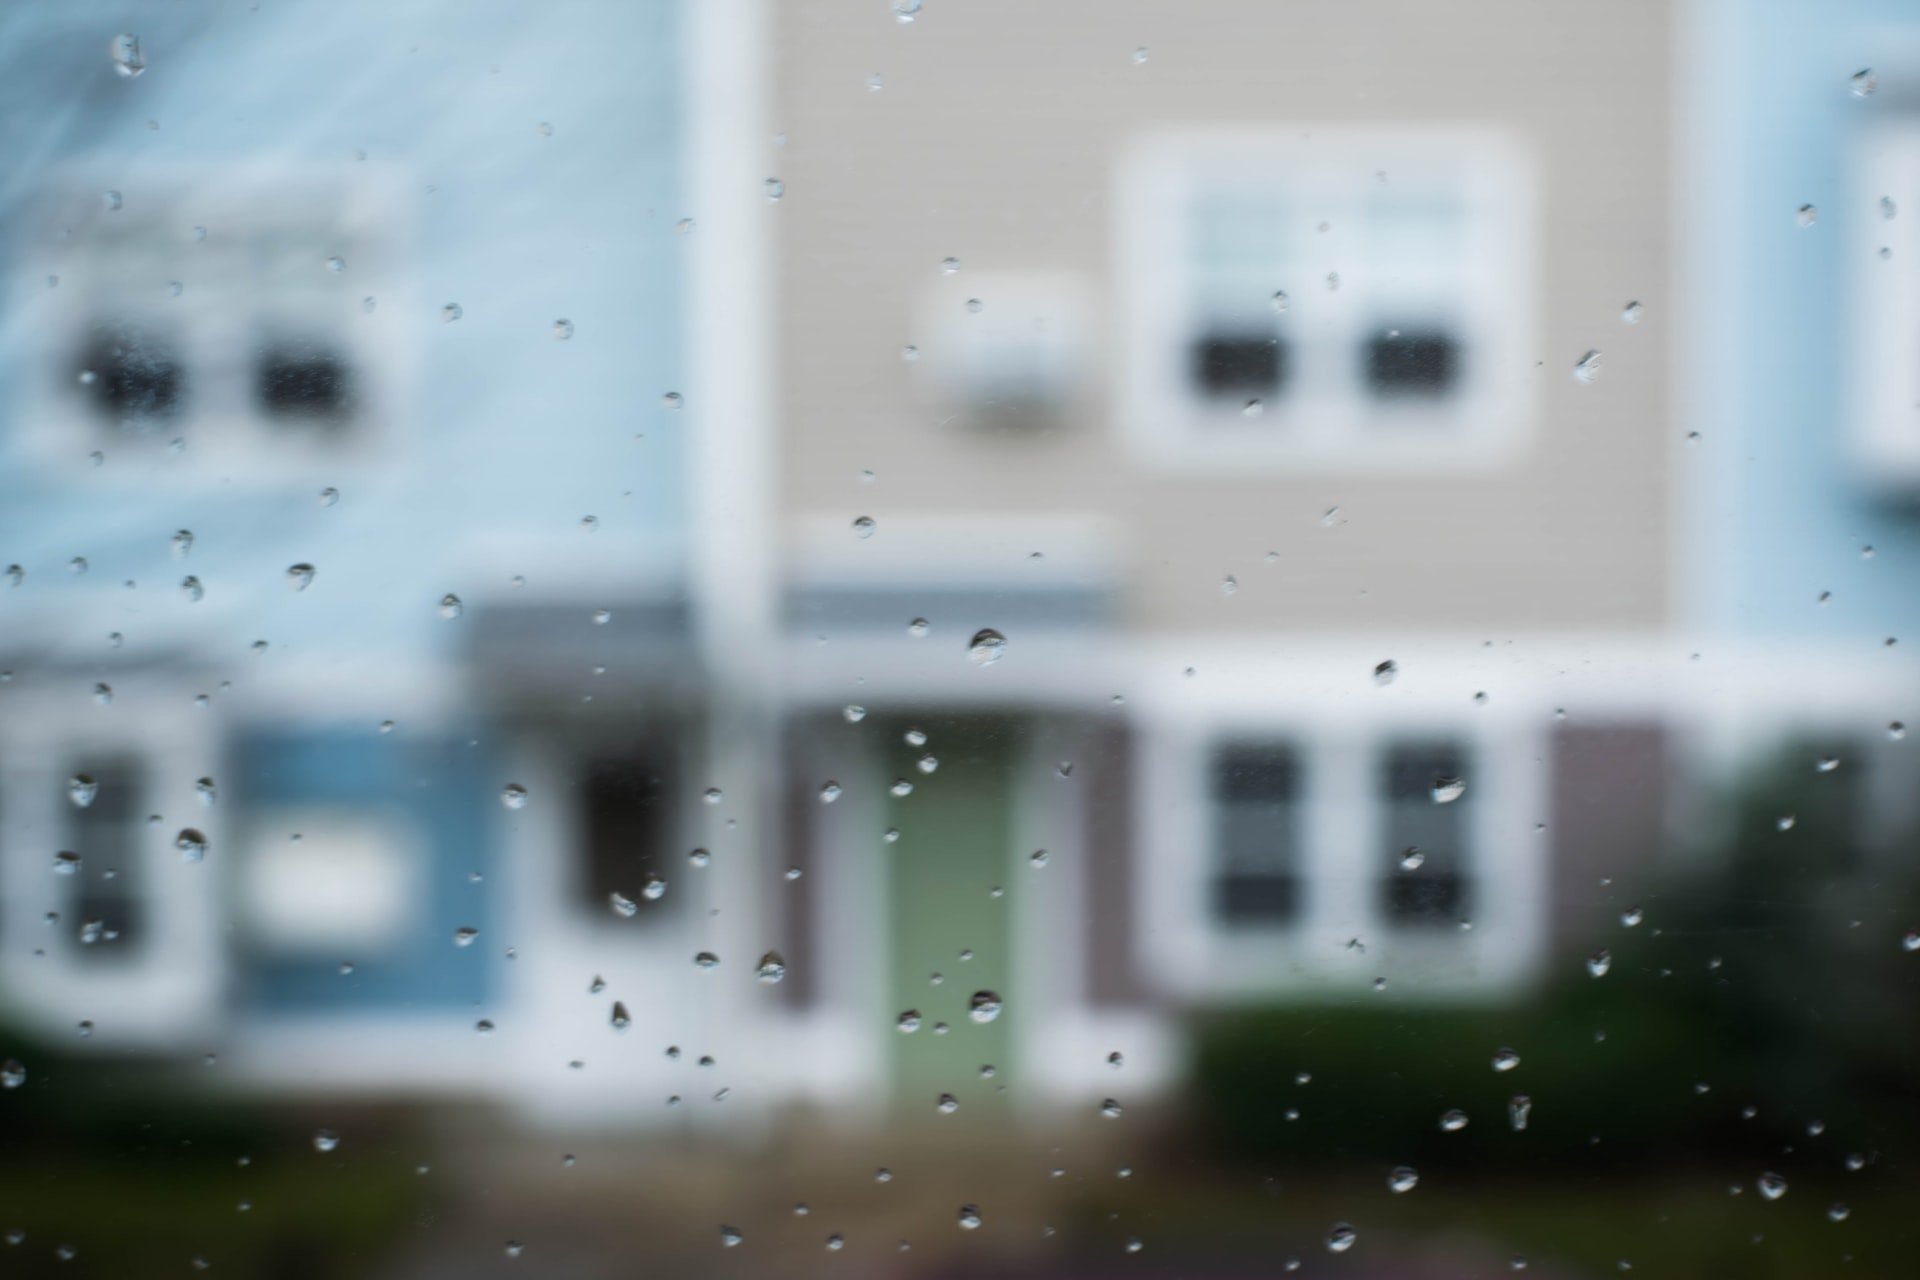 A window with raindrops. Through the window are houses with windows